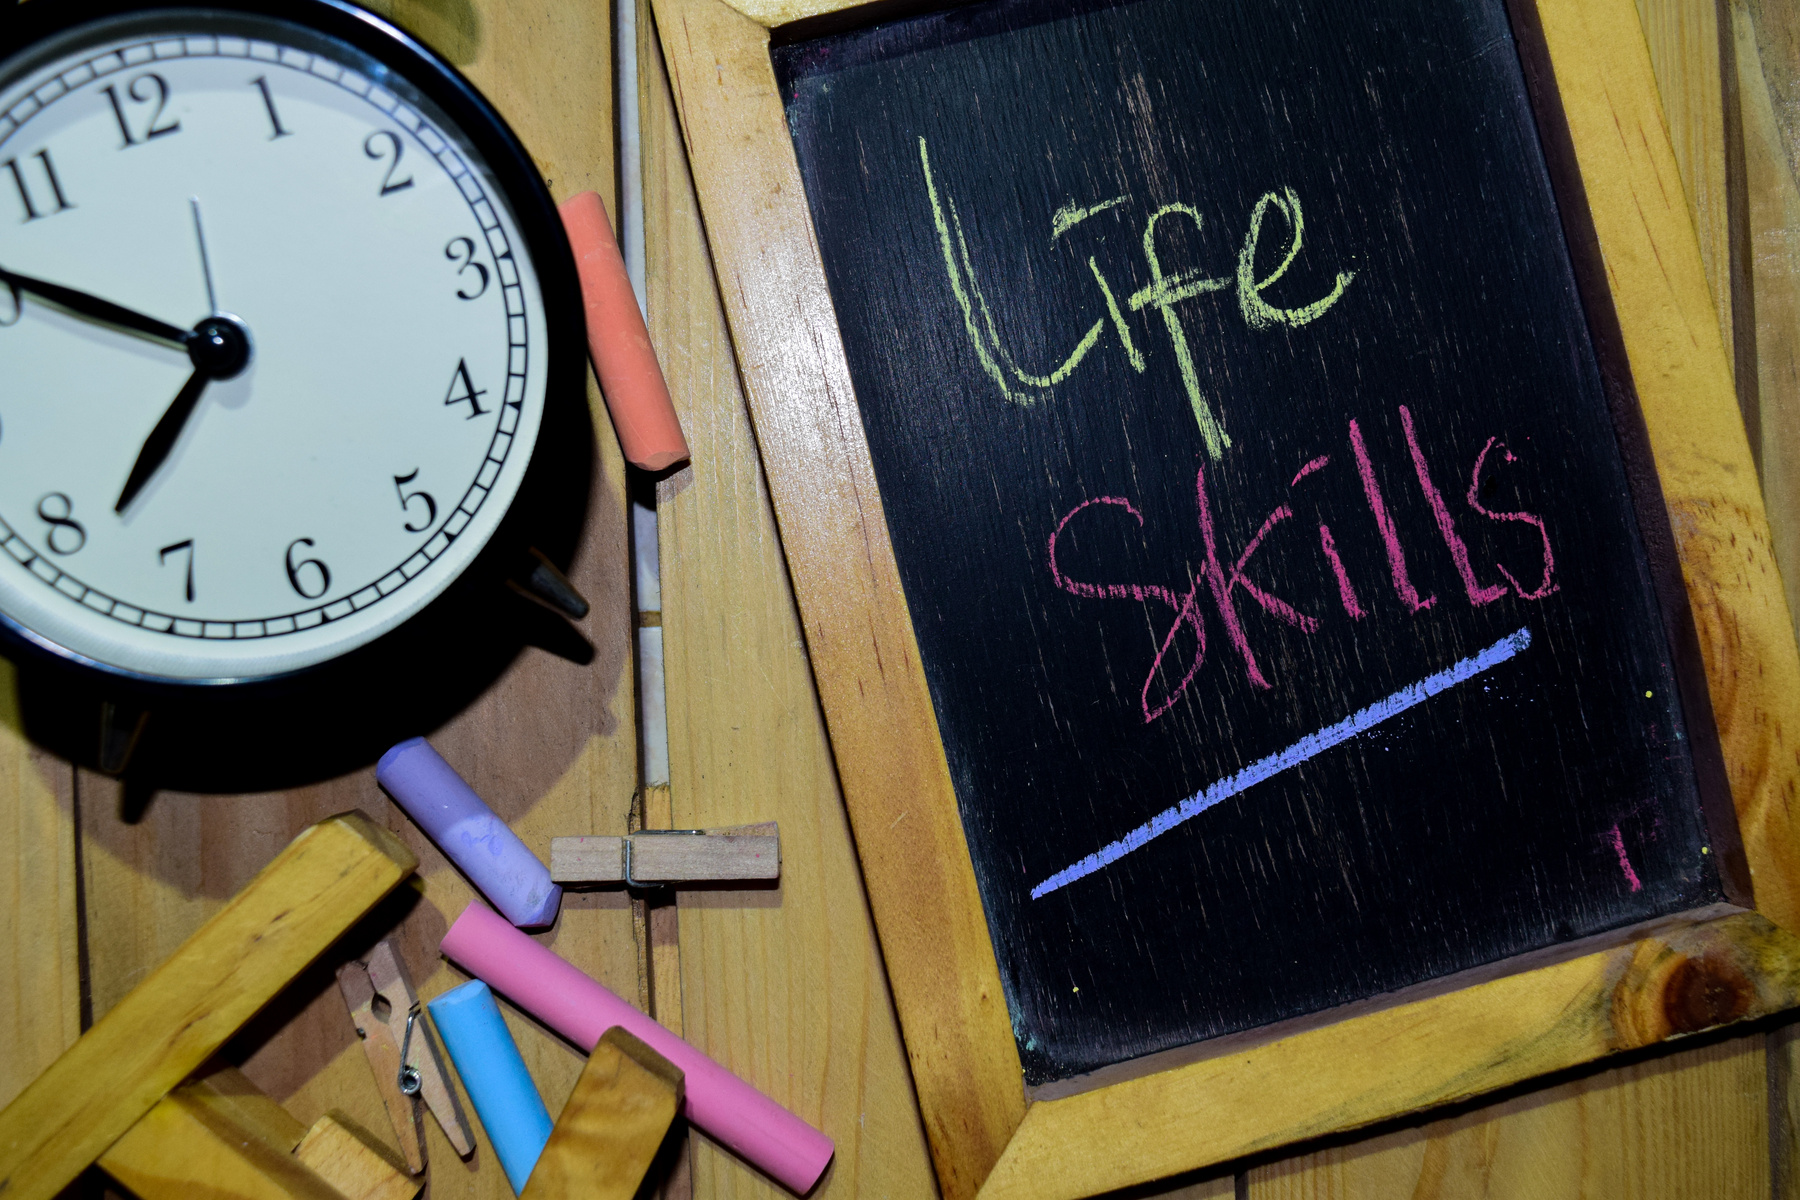 Beyond career planning, Life Quest teaches essential life skills to succeed now and in the future, encompassing self-awareness, goal-setting, and financial literacy